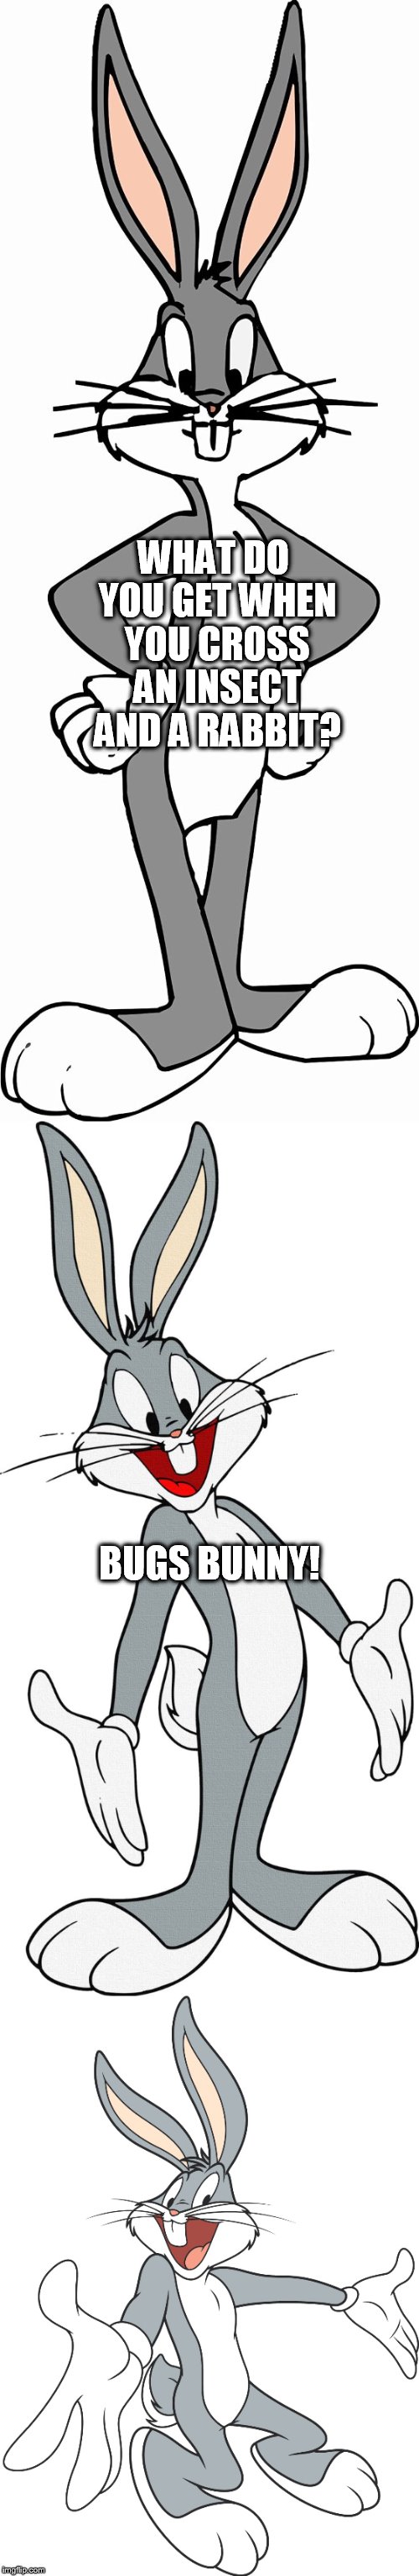 If you cant beat them join them pun! | WHAT DO YOU GET WHEN YOU CROSS AN INSECT AND A RABBIT? BUGS BUNNY! | image tagged in puns,bugs bunny,funny,joke,bug | made w/ Imgflip meme maker